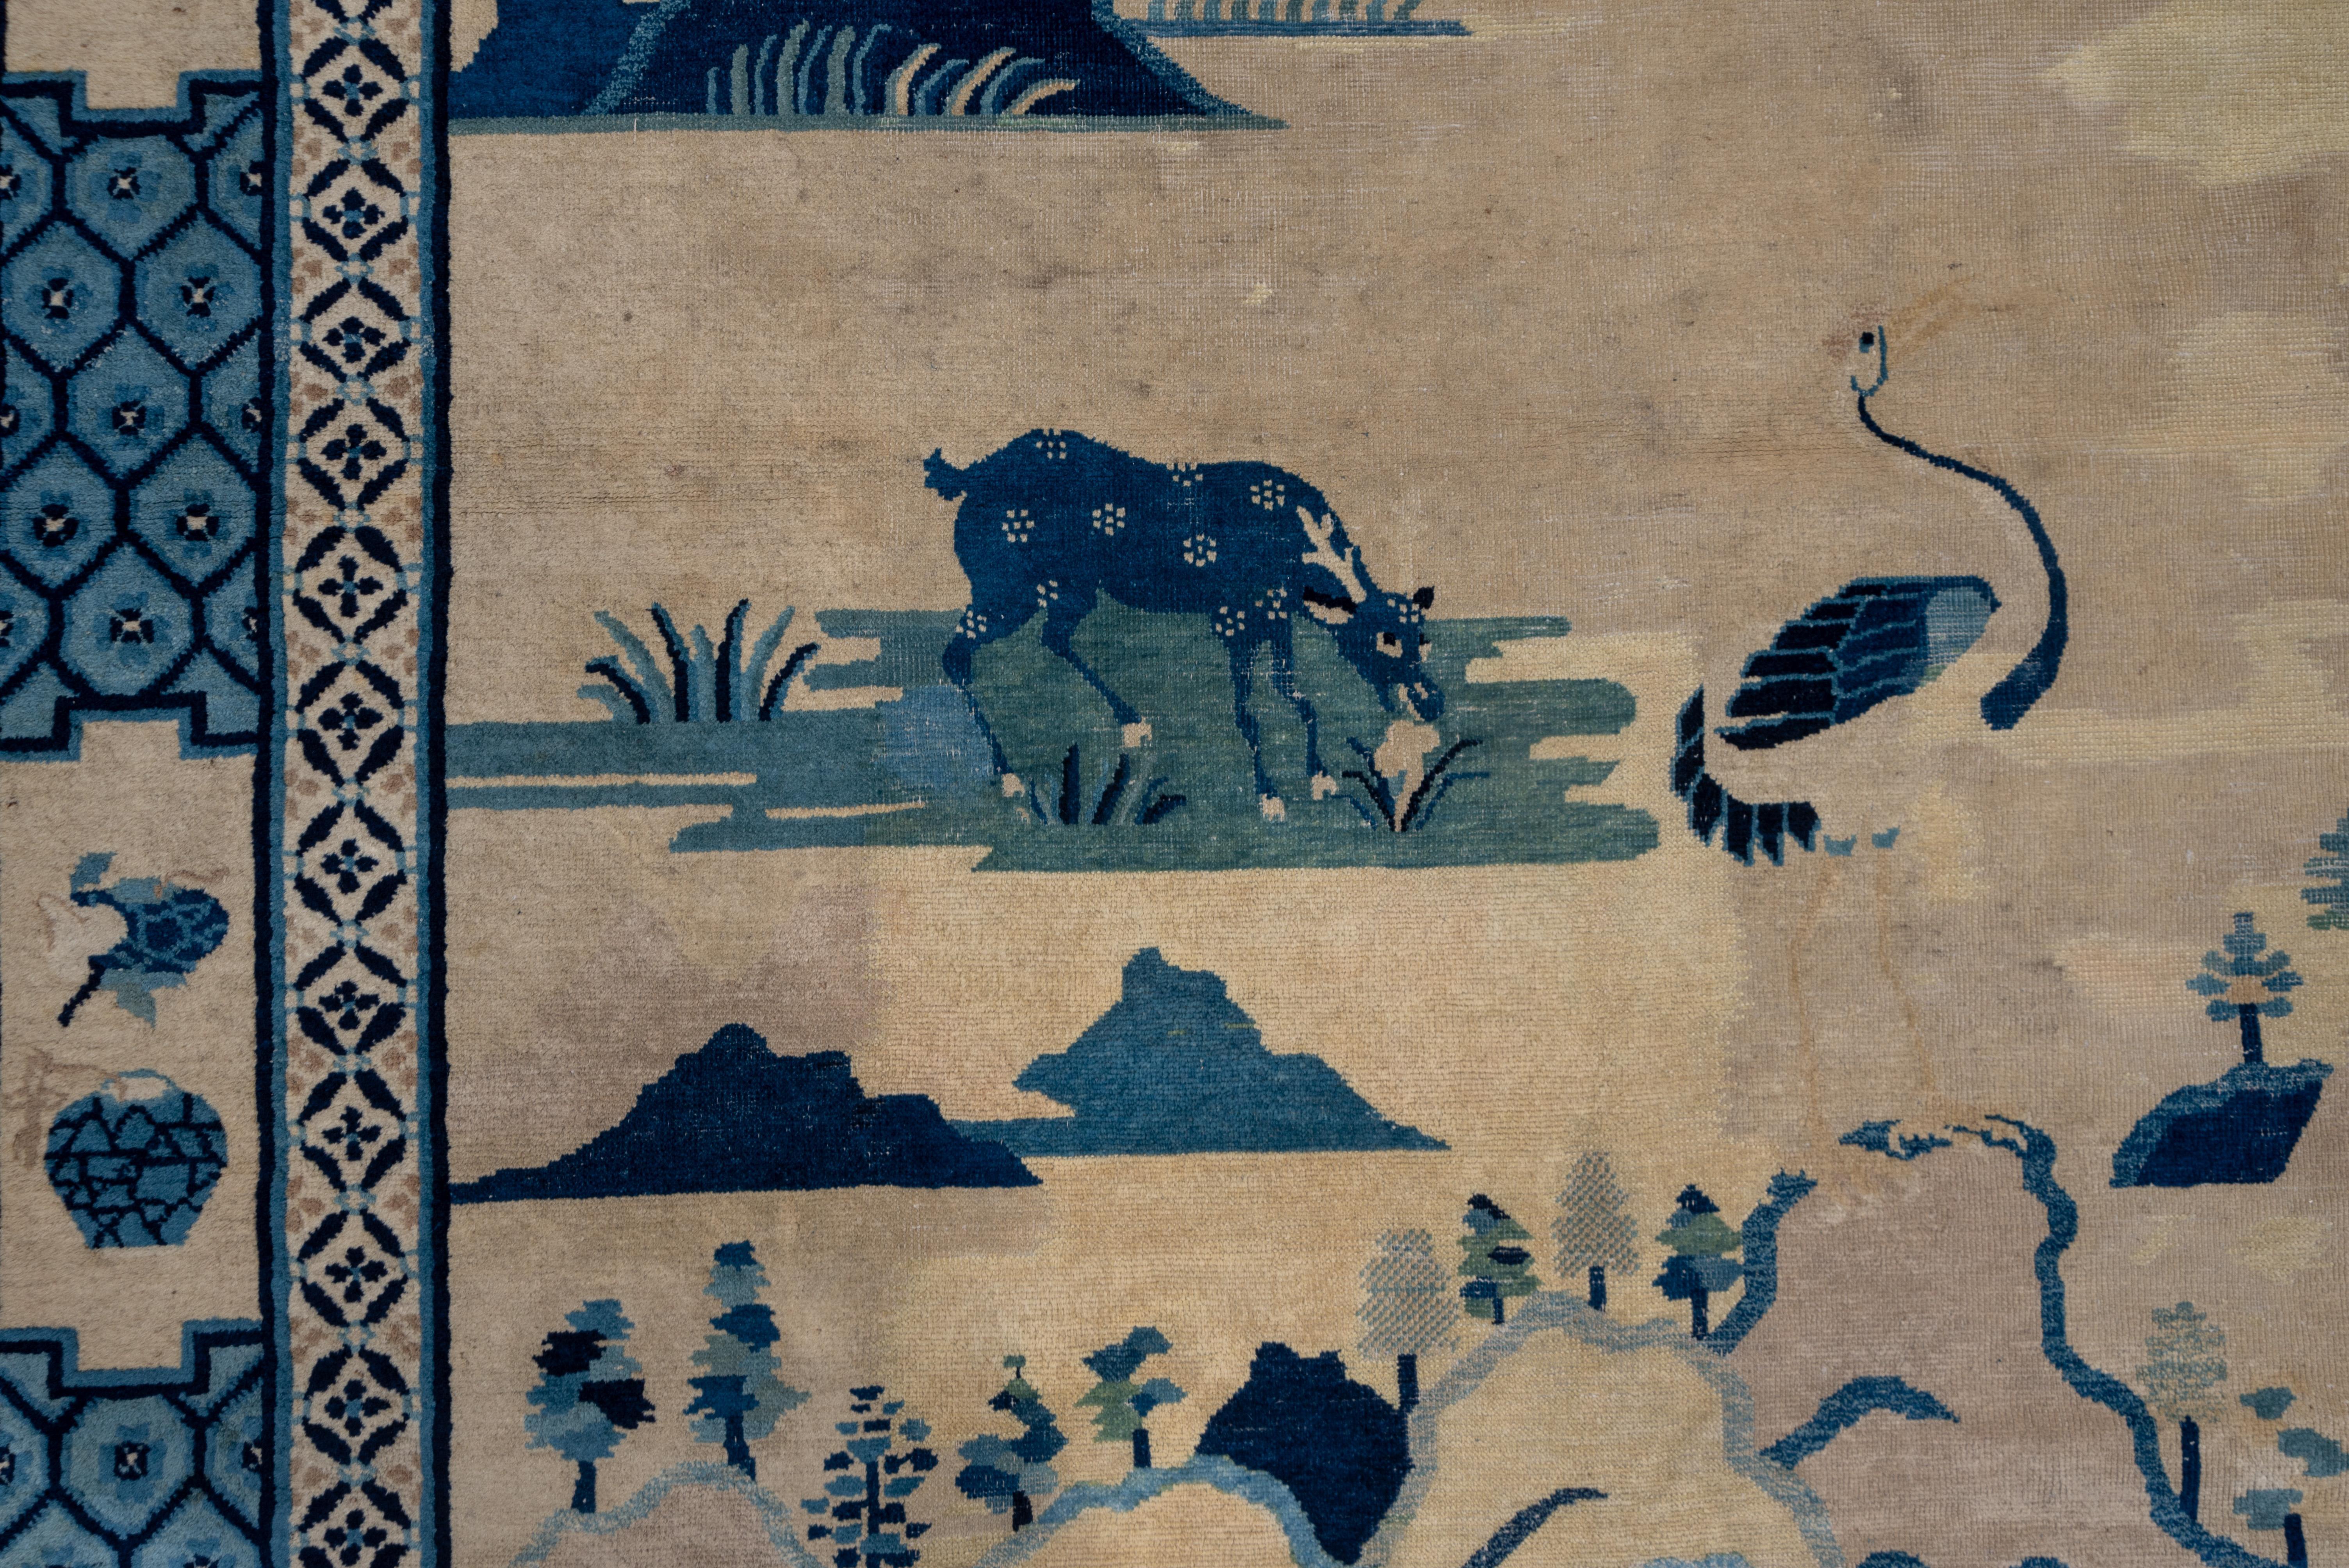 A shan-shui (mountain and water) landscape shows distant, tree-topped mountains, a watery middle distance, and nearby colorfully banded rocks and a rustic dwelling, along with a grazing spotted horse. Cartouches with precious objects against a